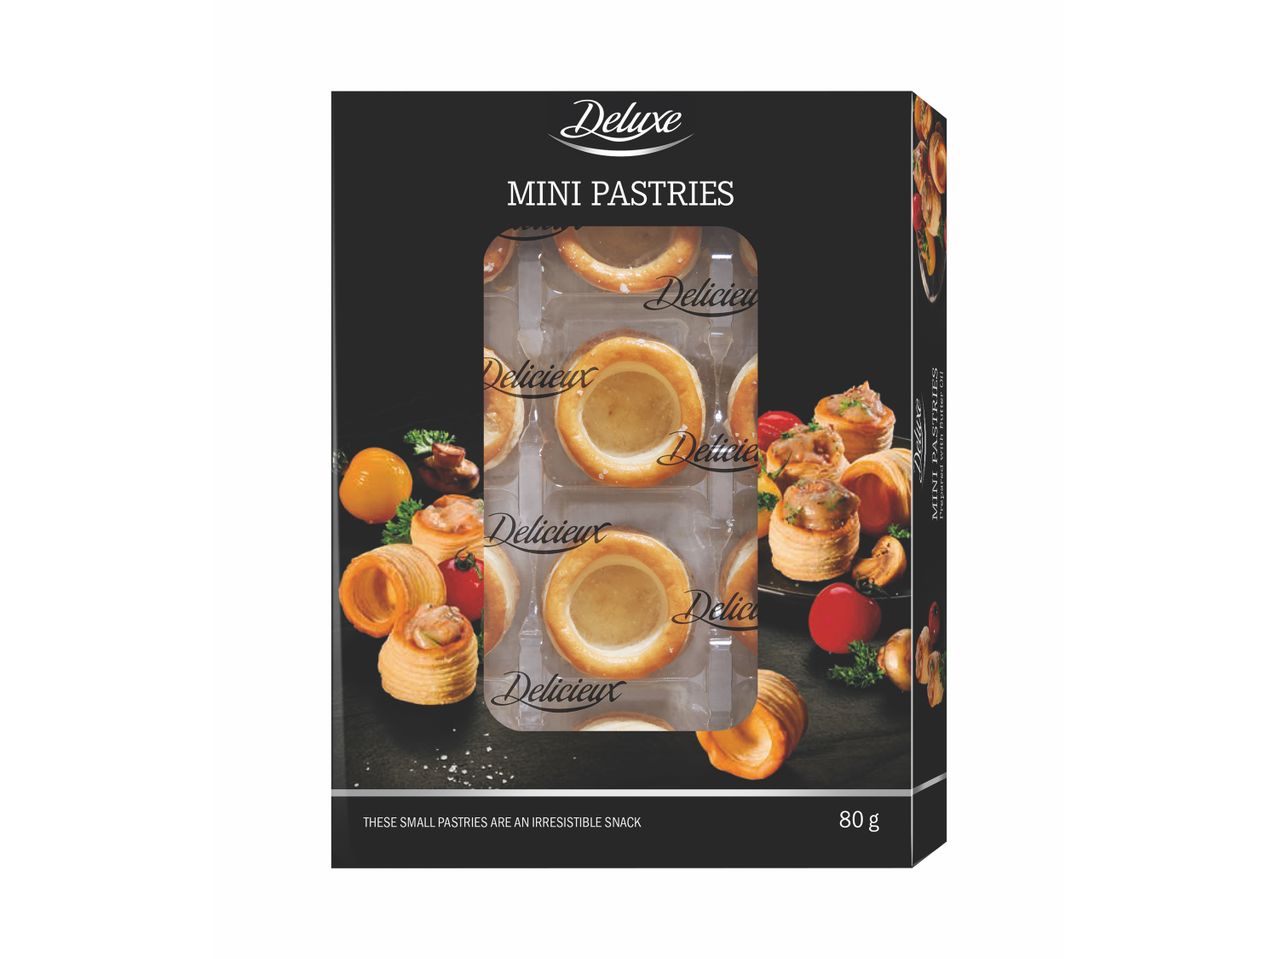 Go to full screen view: Deluxe Mini Pastries - Image 1